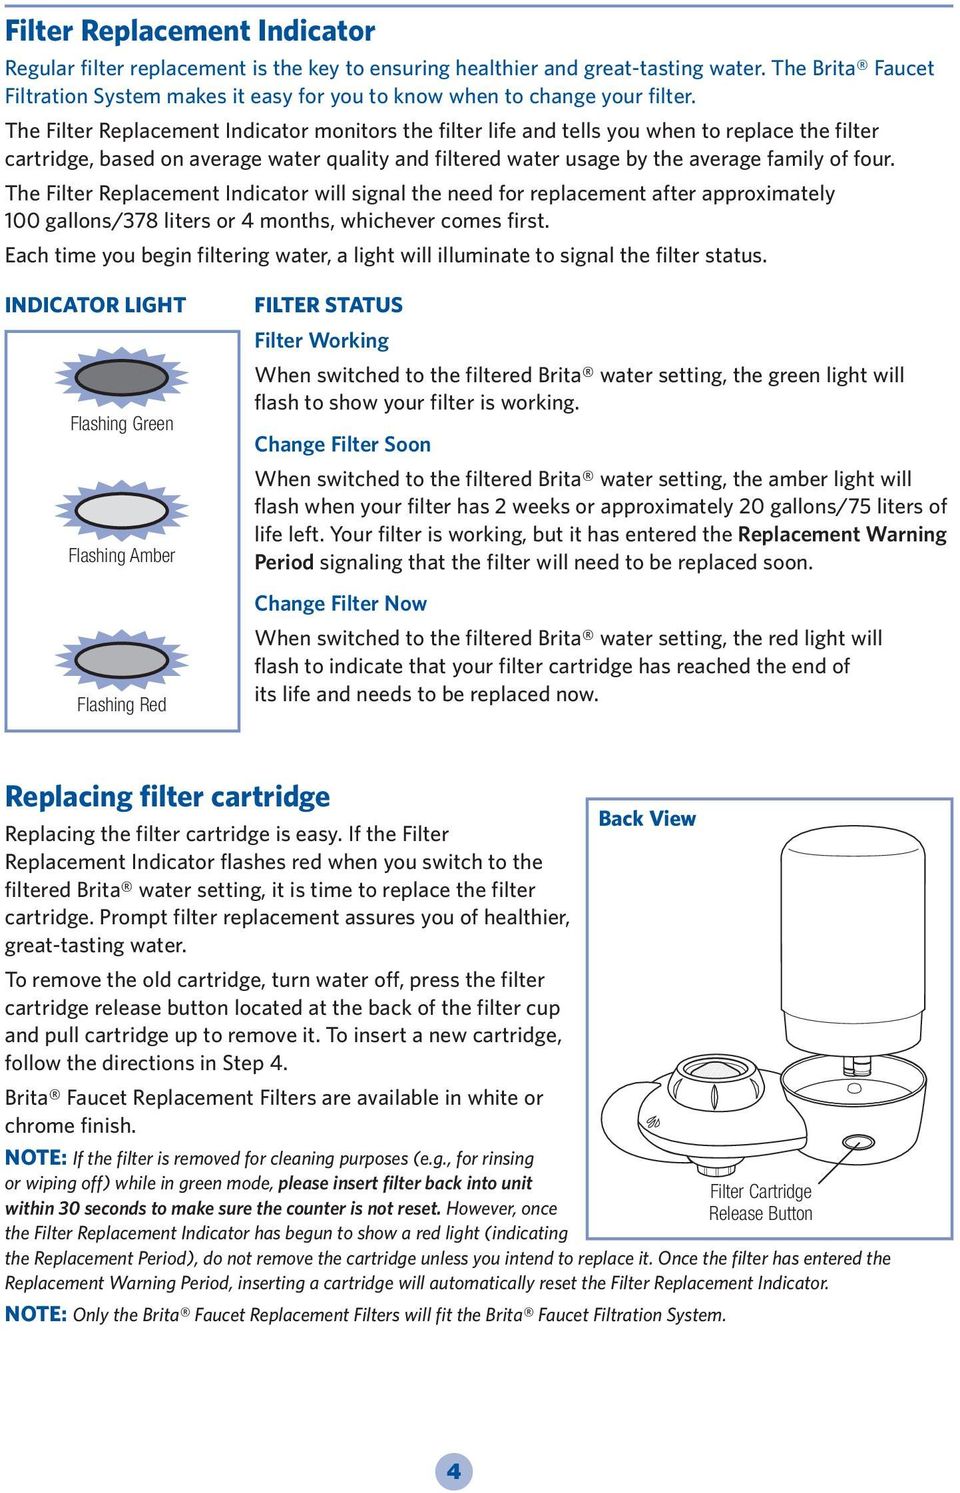 The Filter Replacement Indicator monitors the filter life and tells you when to replace the filter cartridge, based on average water quality and filtered water usage by the average family of four.